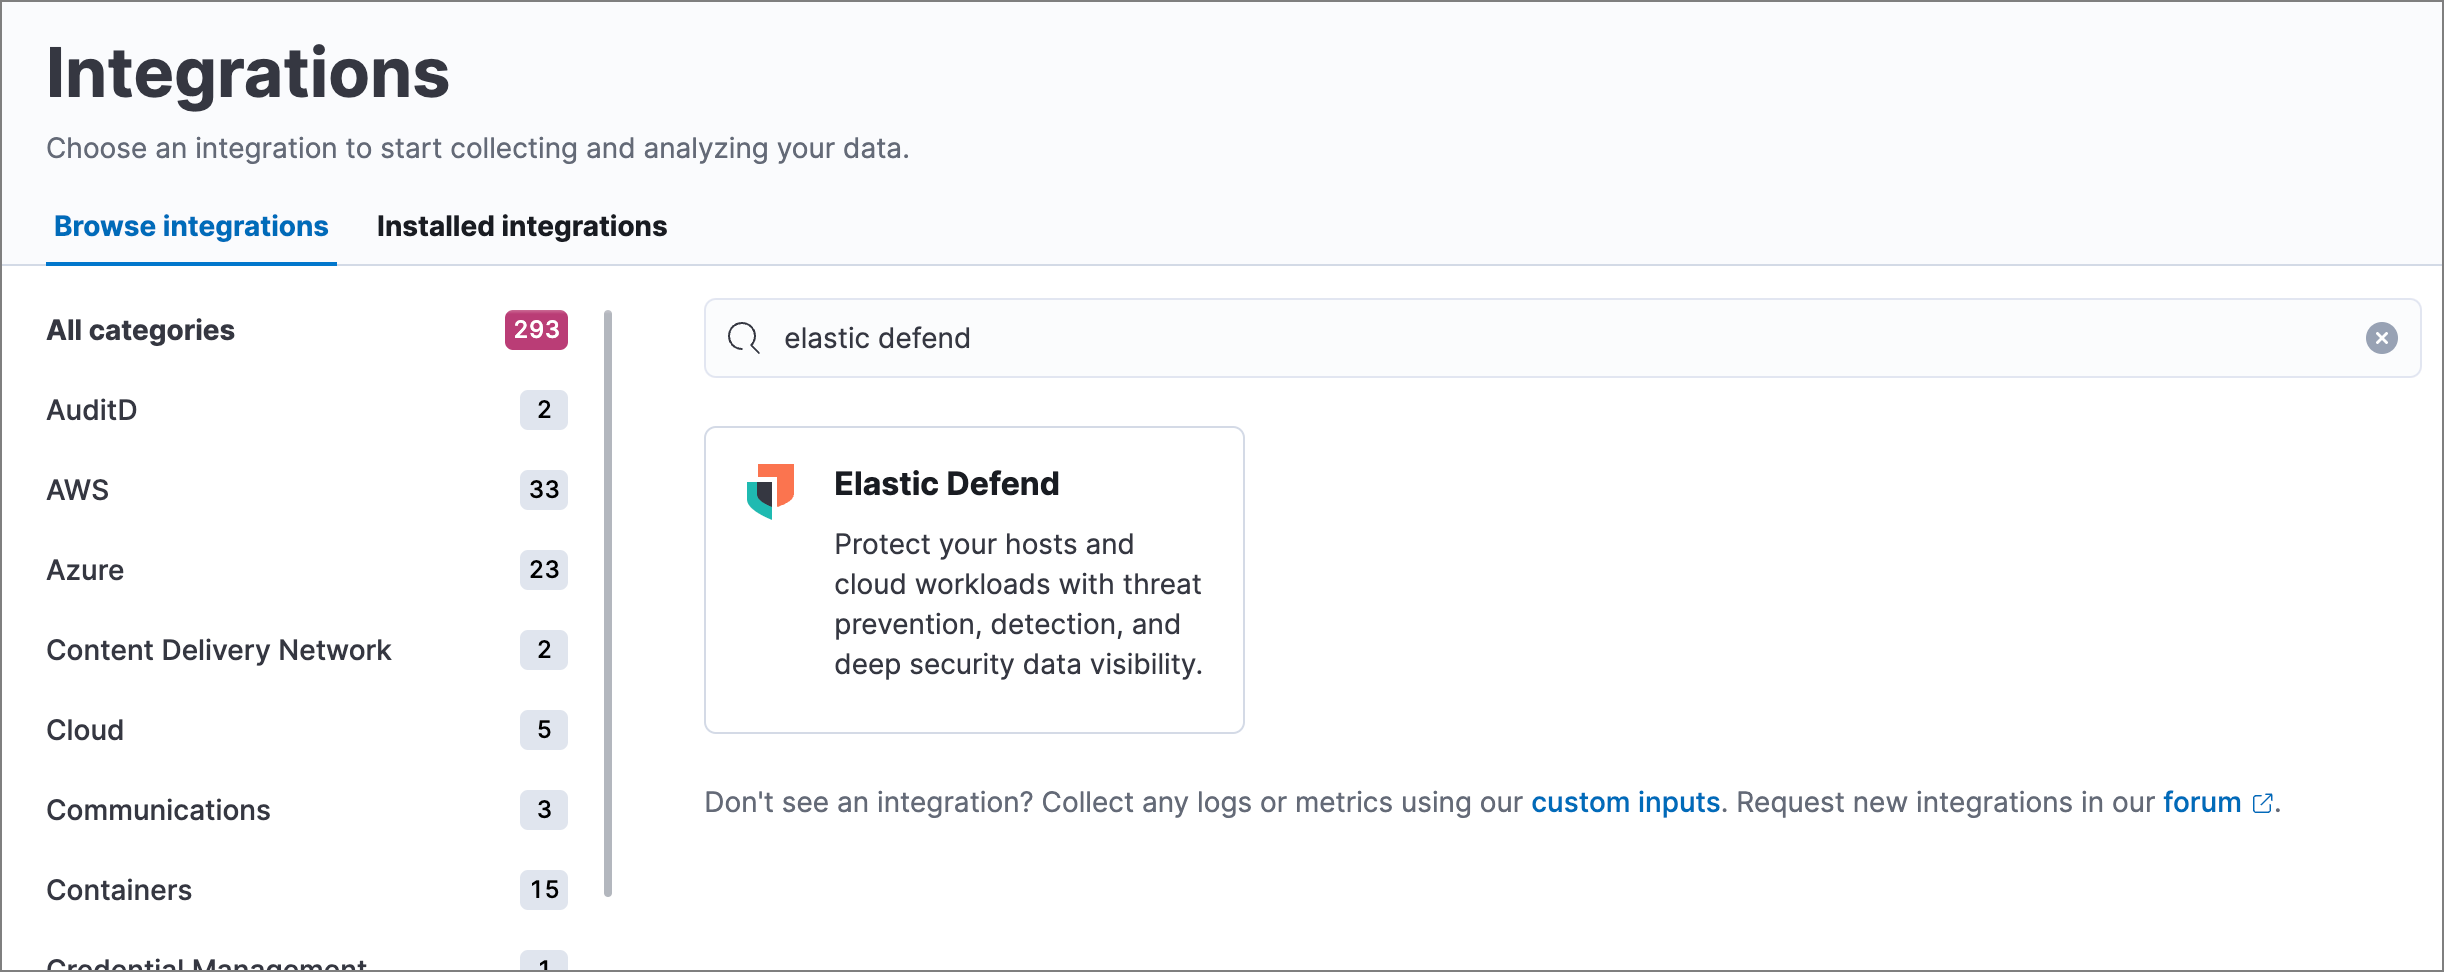 Search result for "Elastic Defend" on the Integrations page.